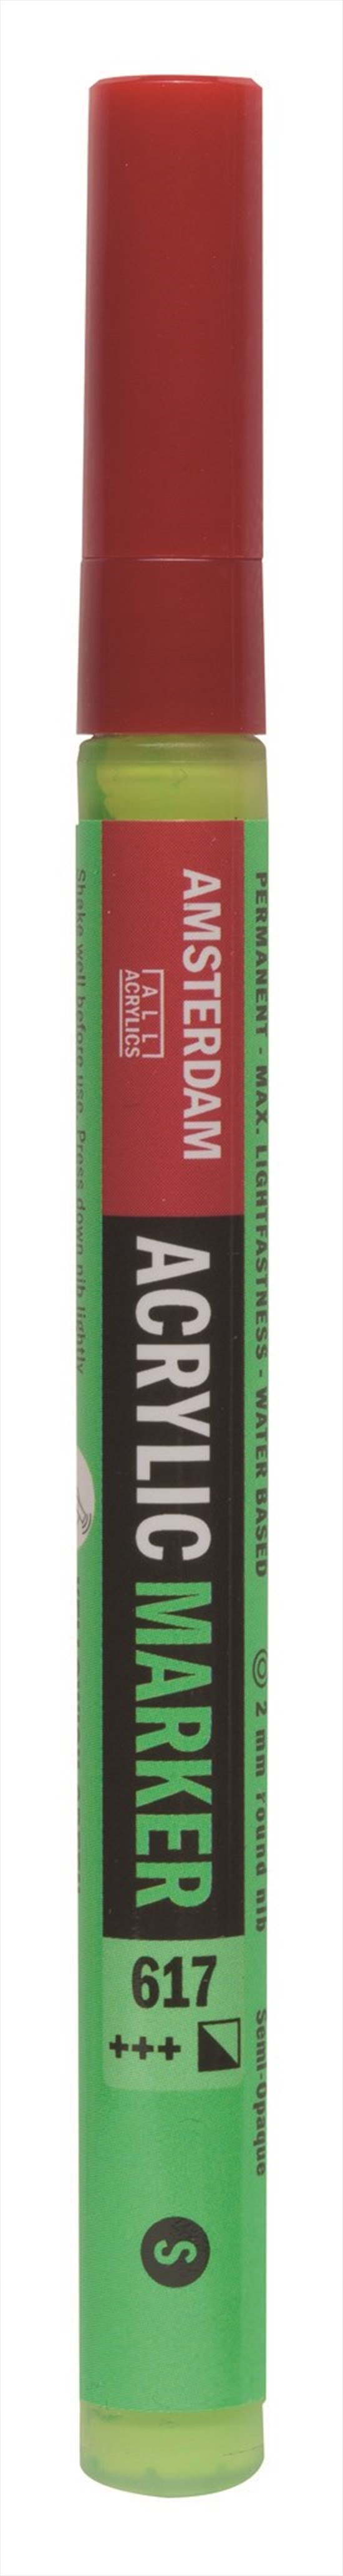 AAC MARKER S YLWISH GREEN SW